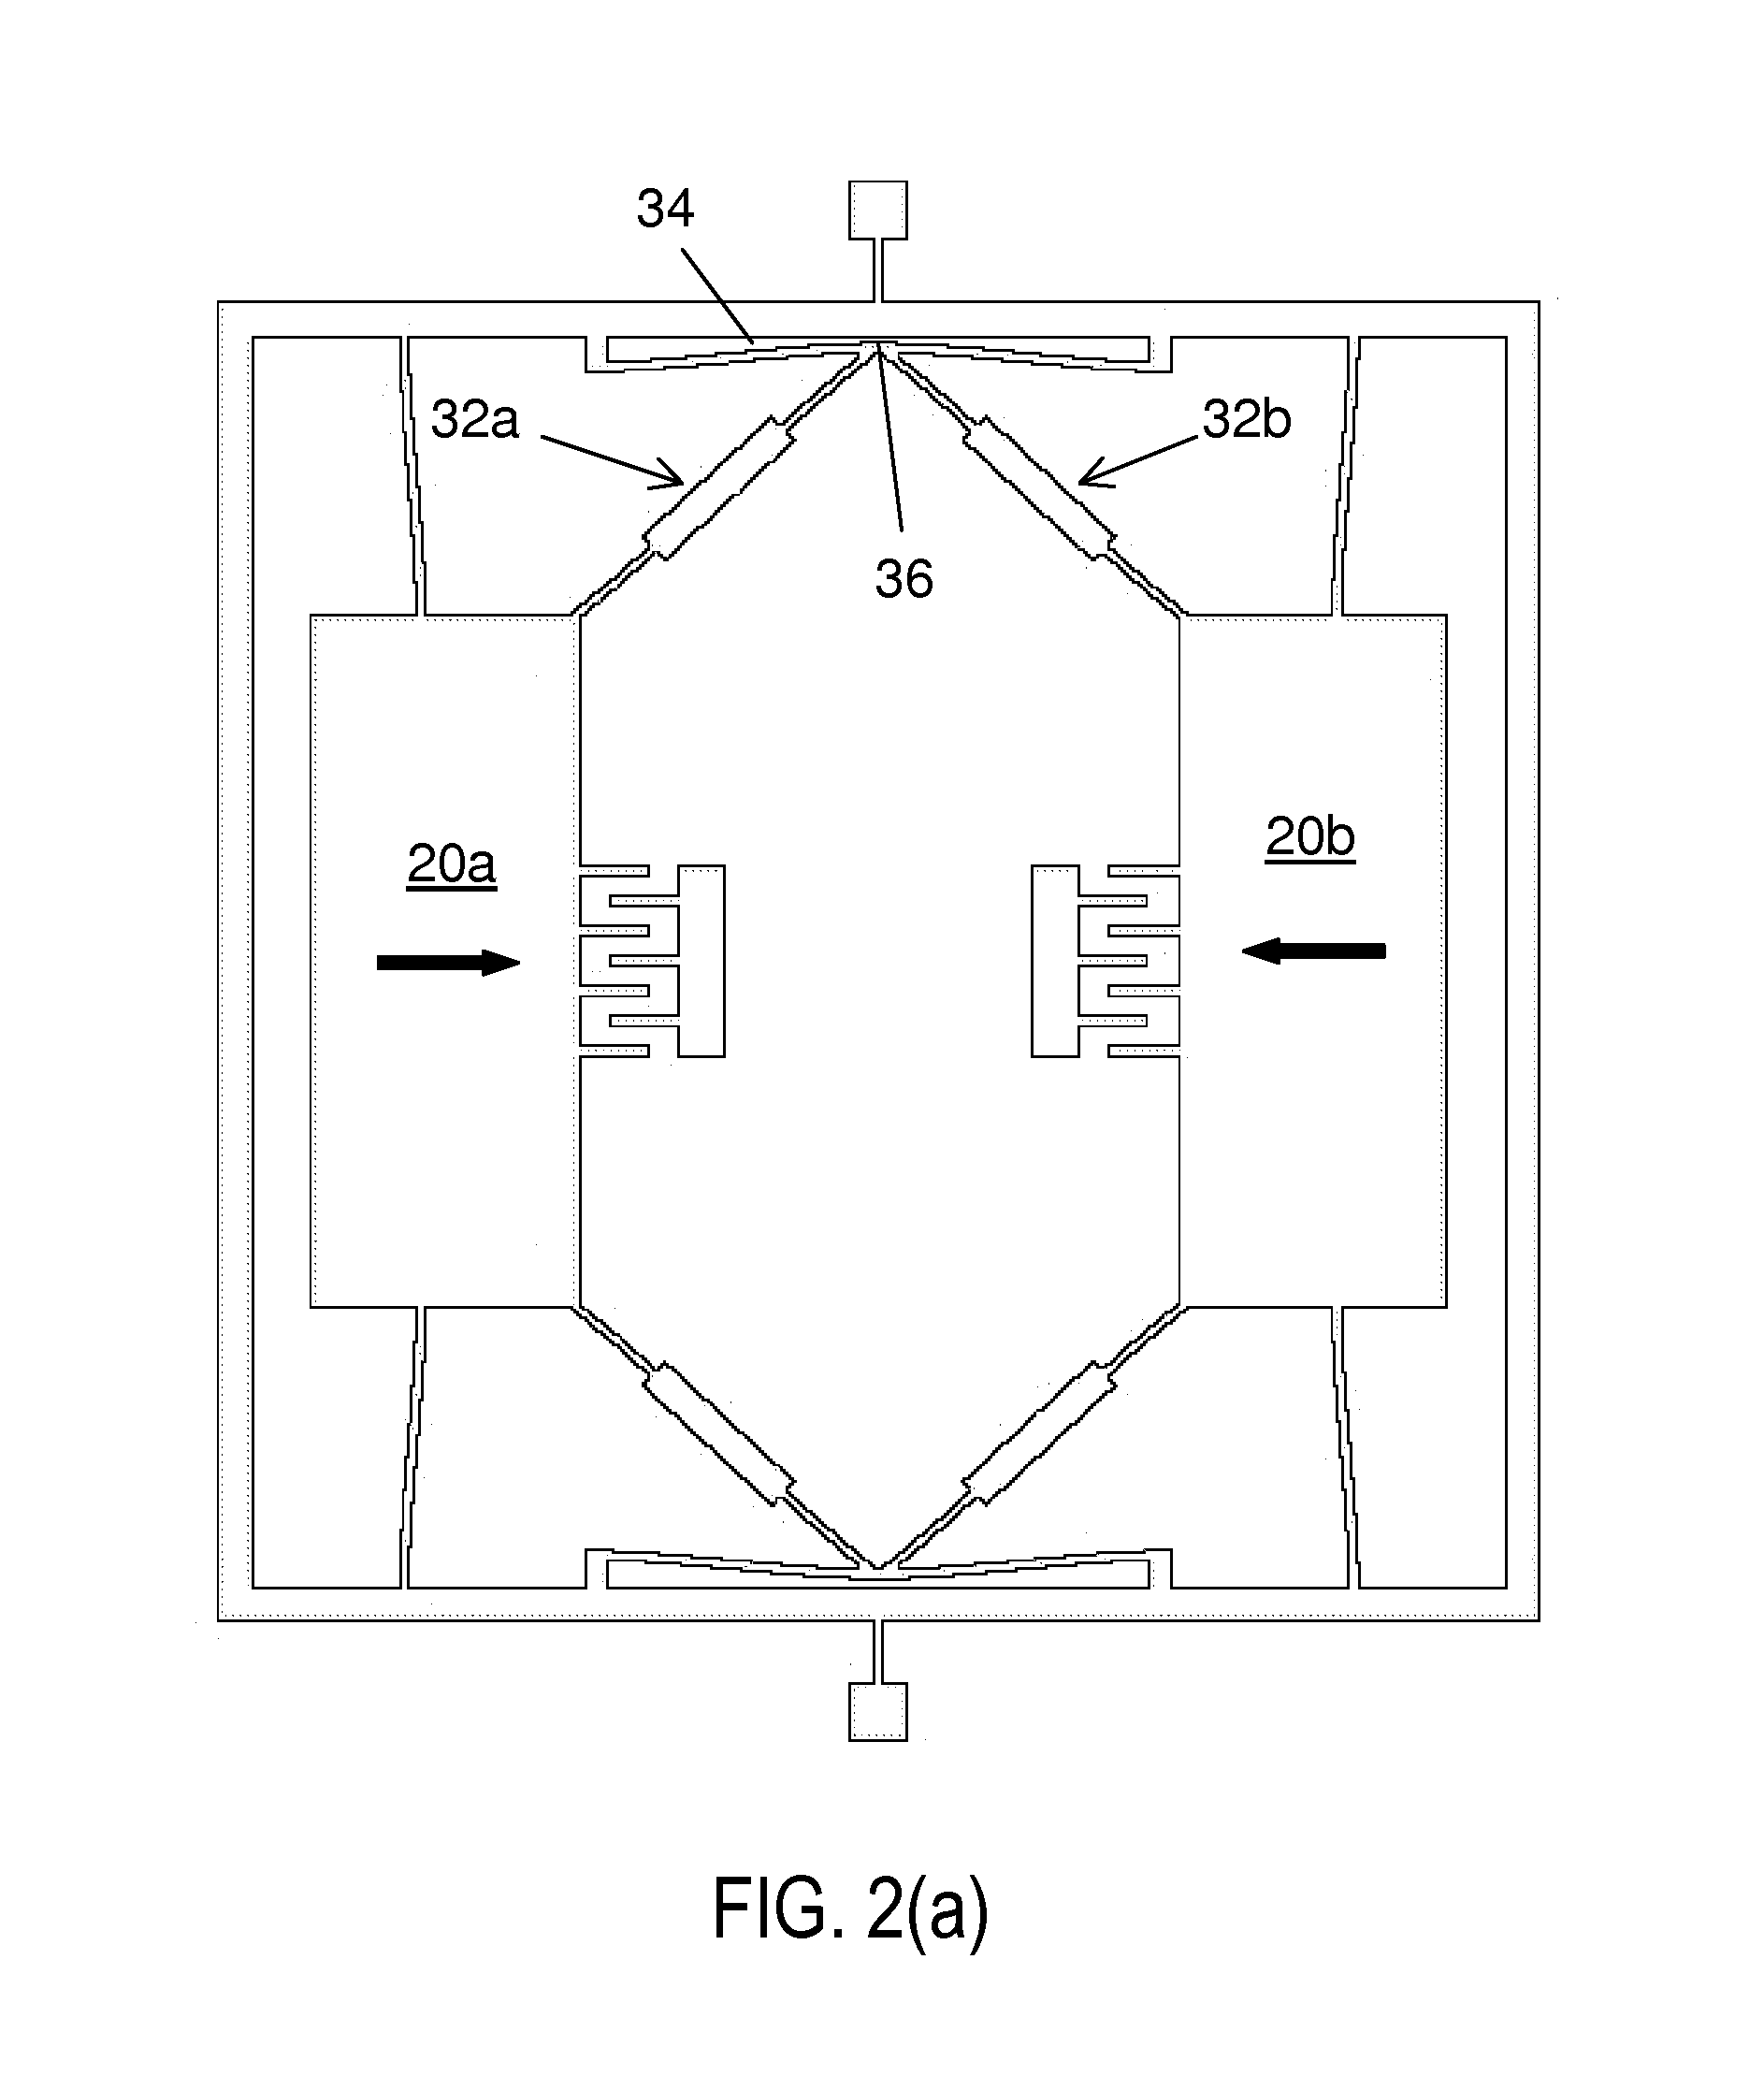 Angular rate sensor with suppressed linear acceleration response